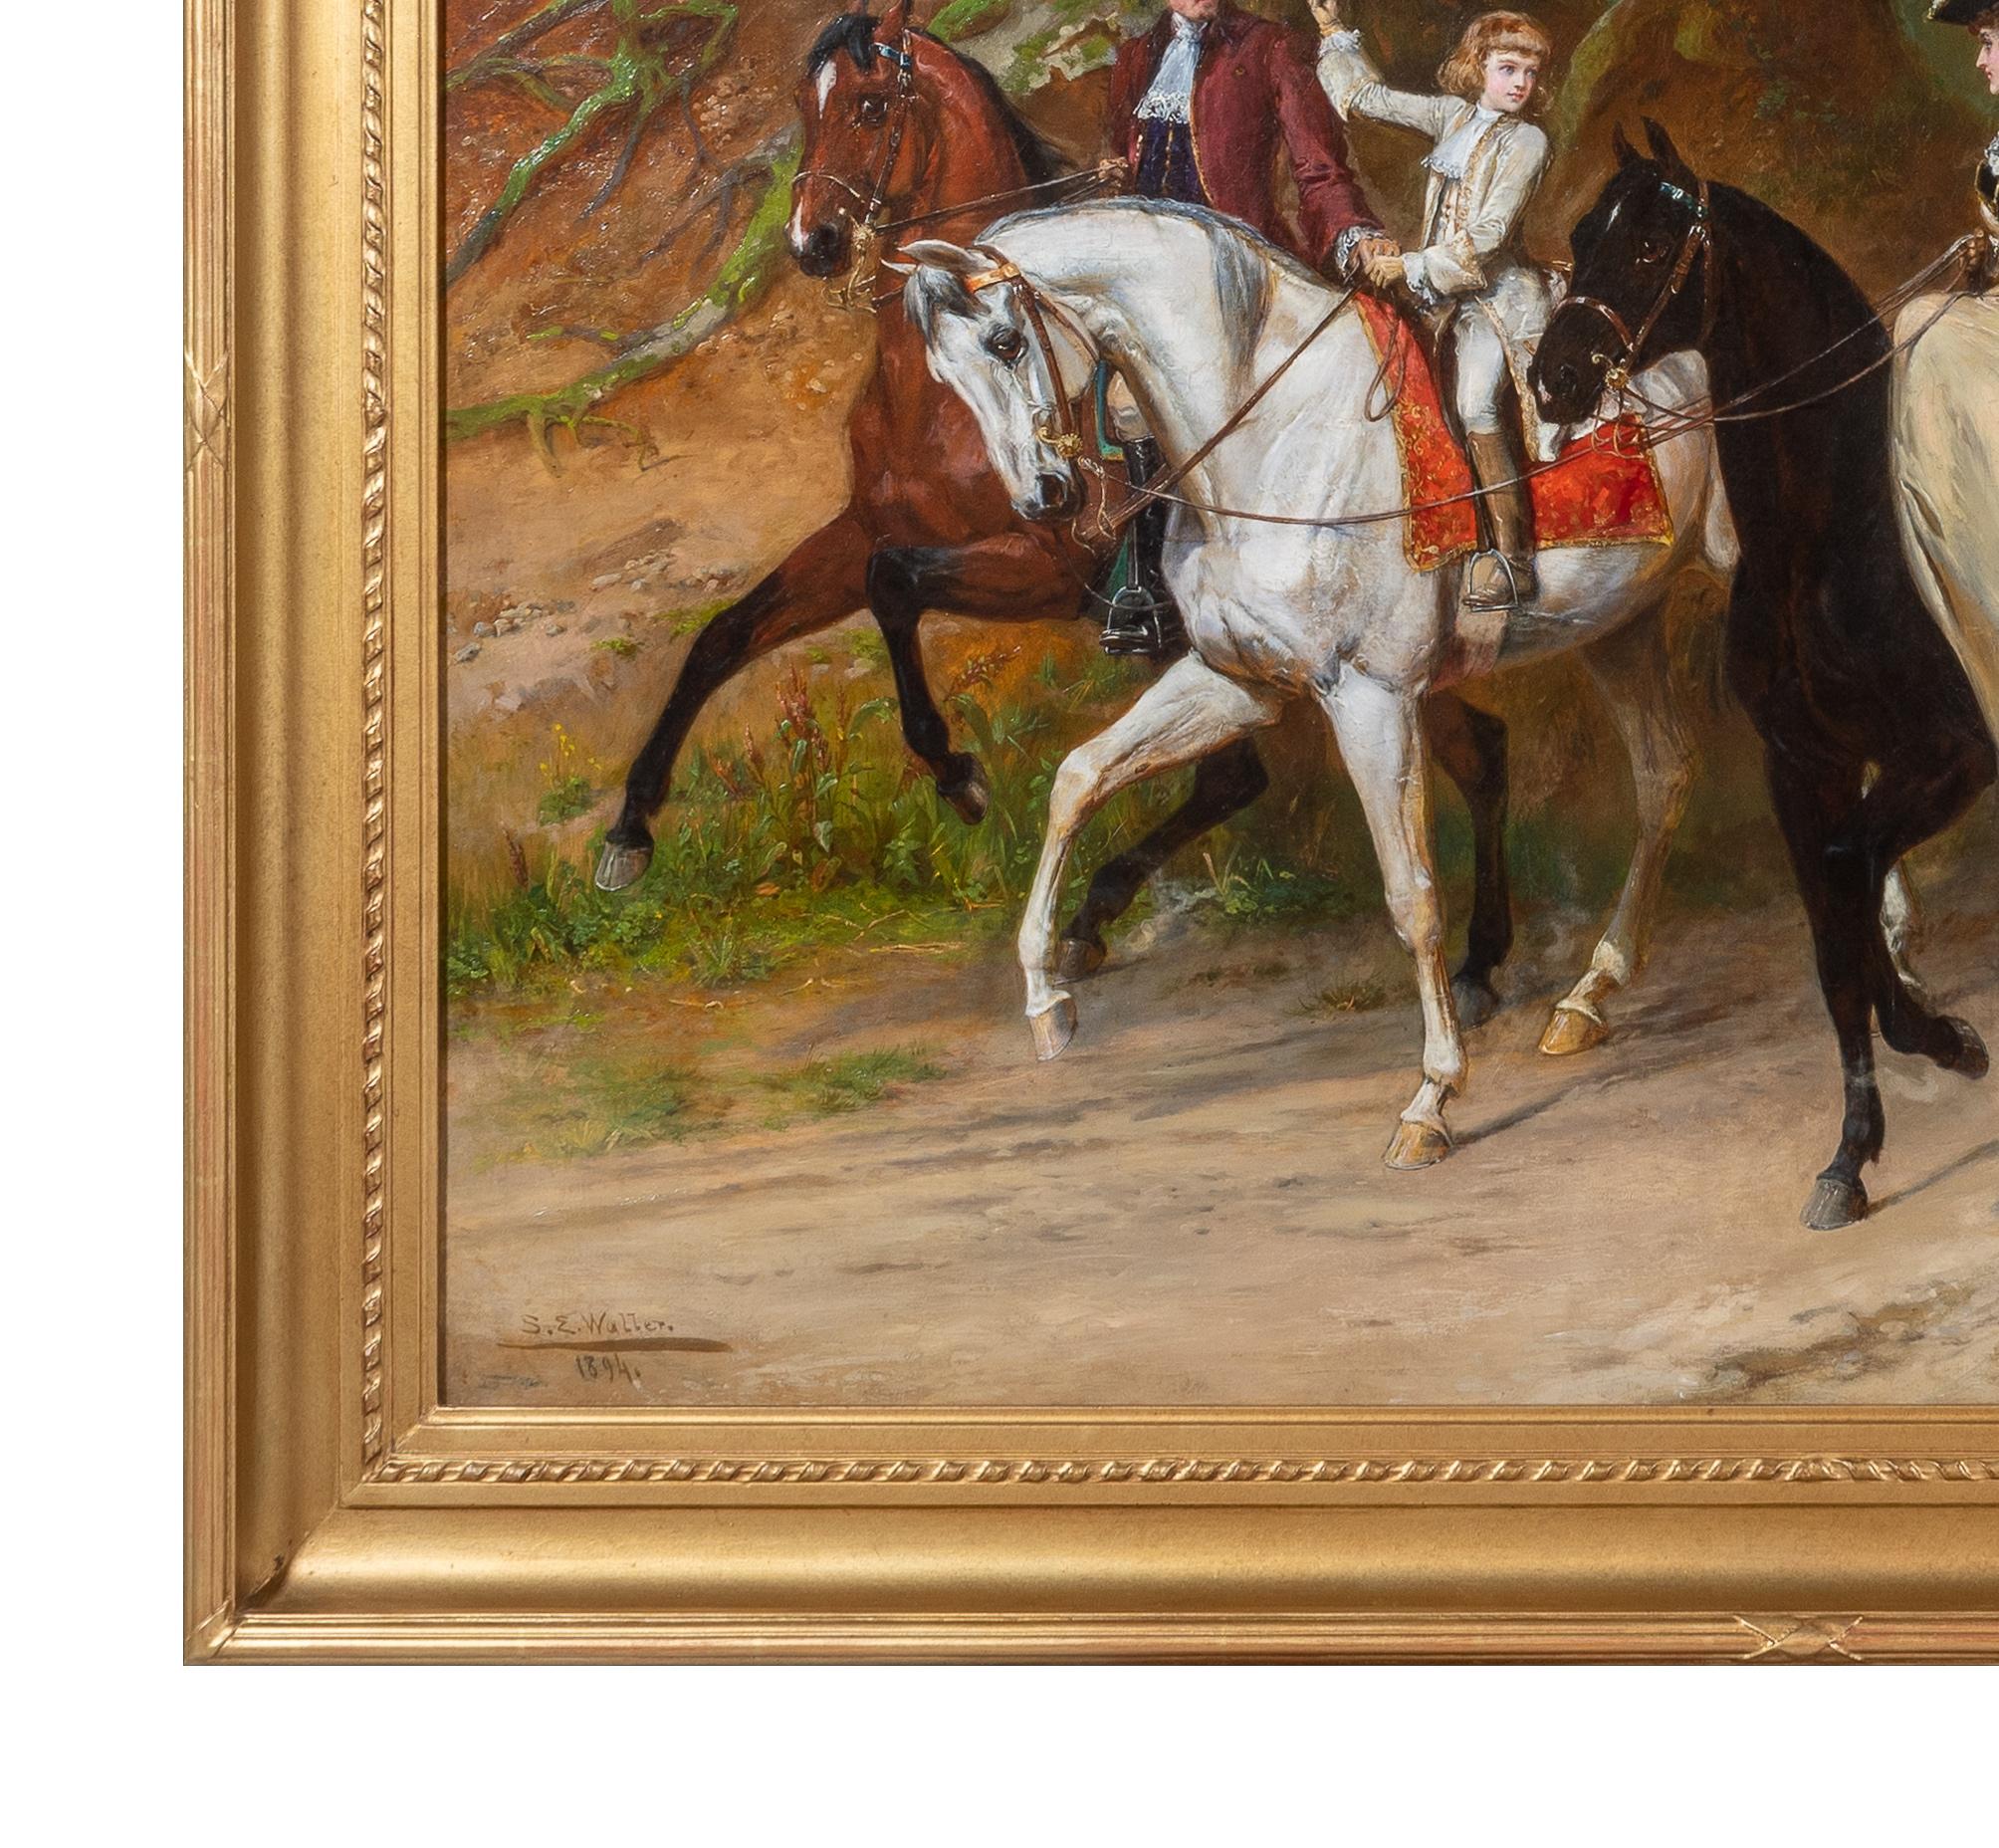 'A Gallant Salute' Figurative 19th Century painting of royalty, horses & hounds - Impressionist Painting by Samuel Edmond Waller